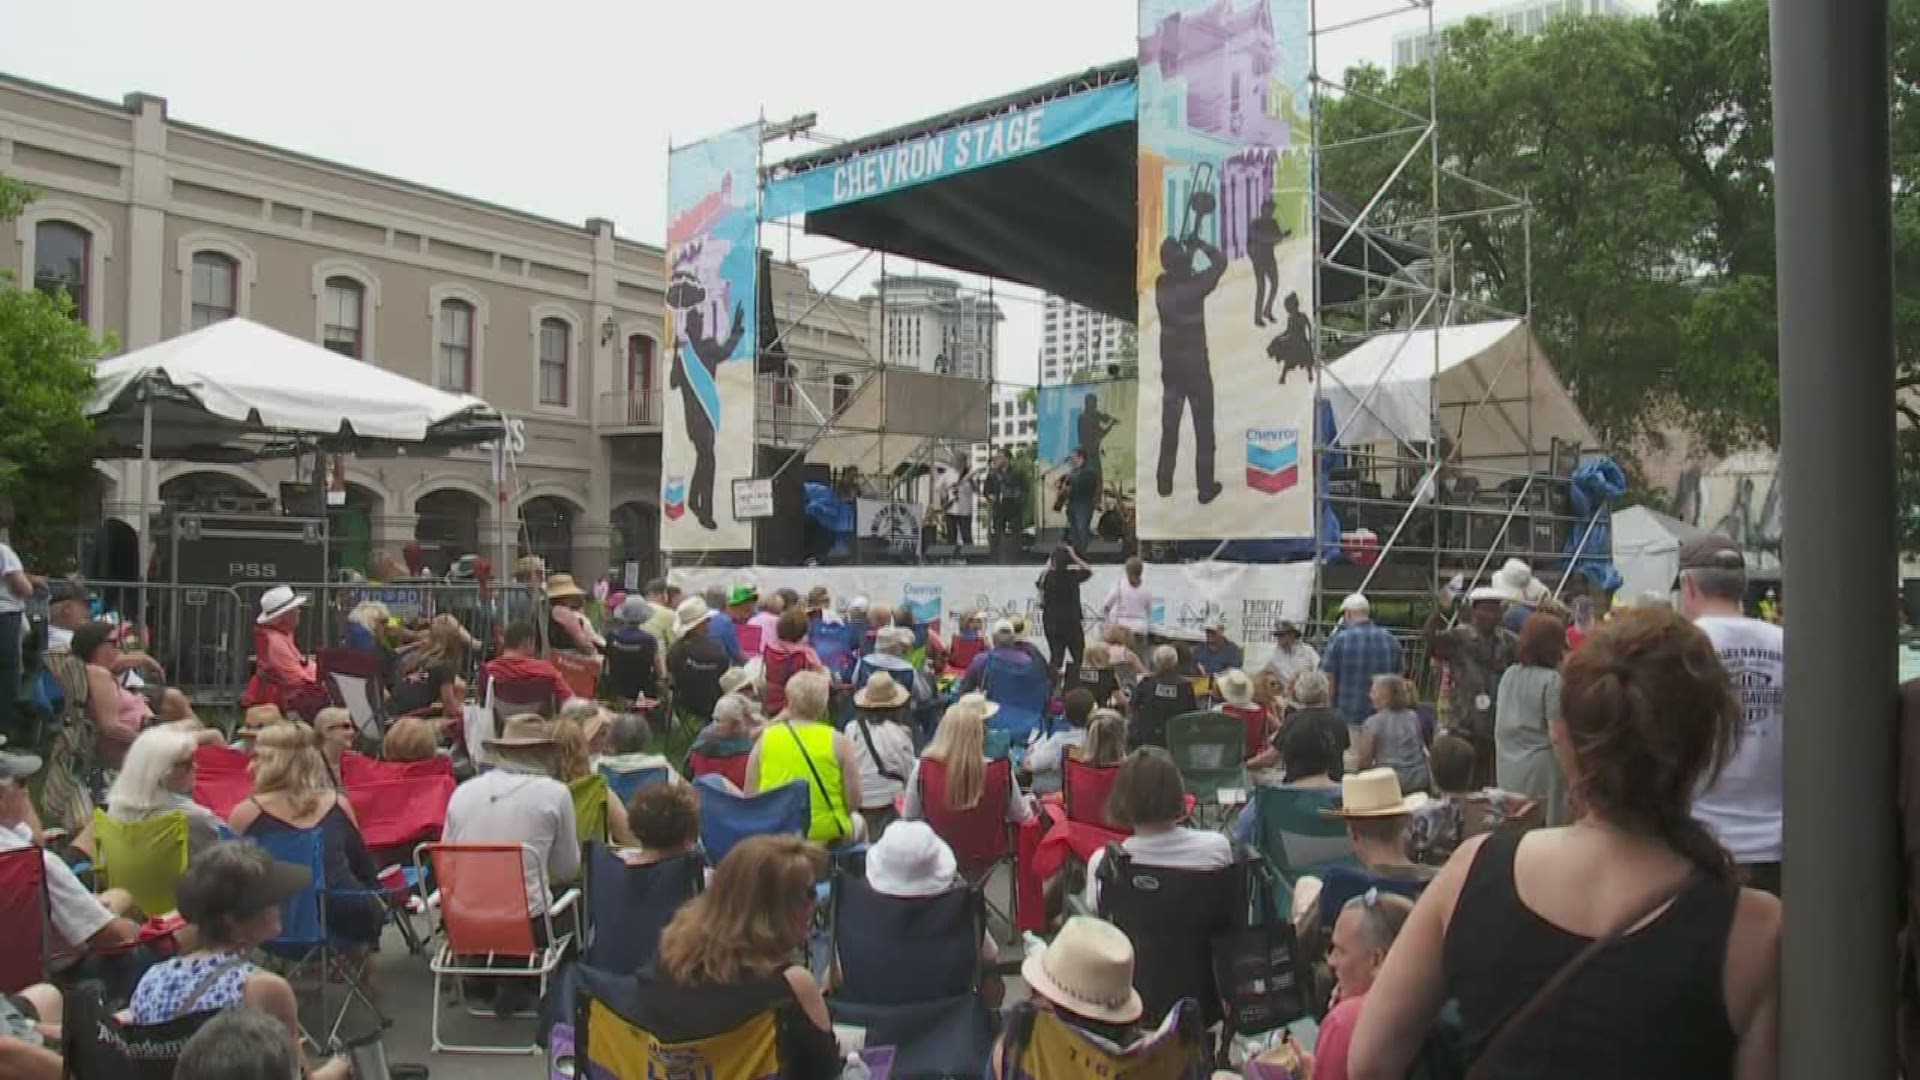 The last thing on the minds of the thousands at the French Quarter Festival Friday was the bad weather forecast to move through over night Saturday into Sunday morning.